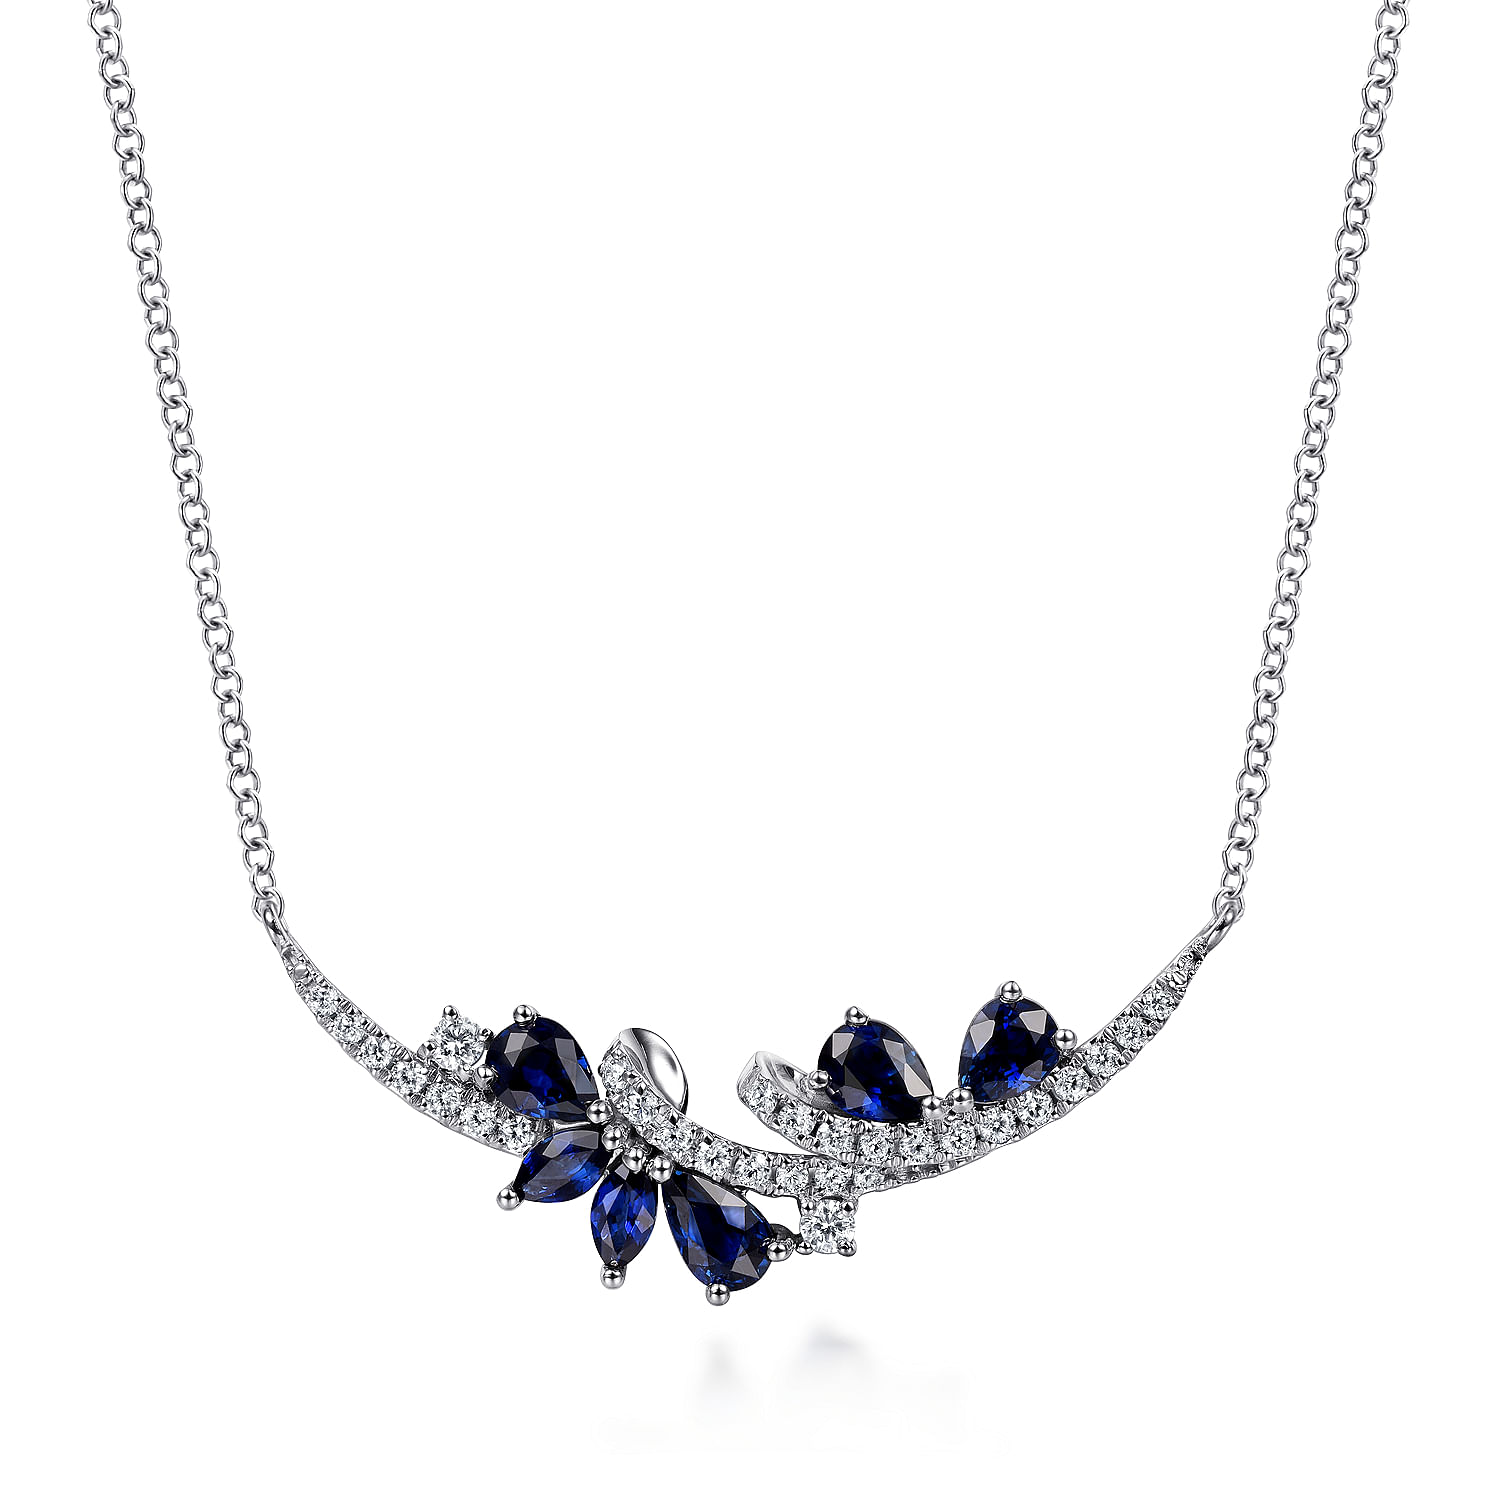 14K White Gold Diamond and Sapphire Curved Bar Necklace